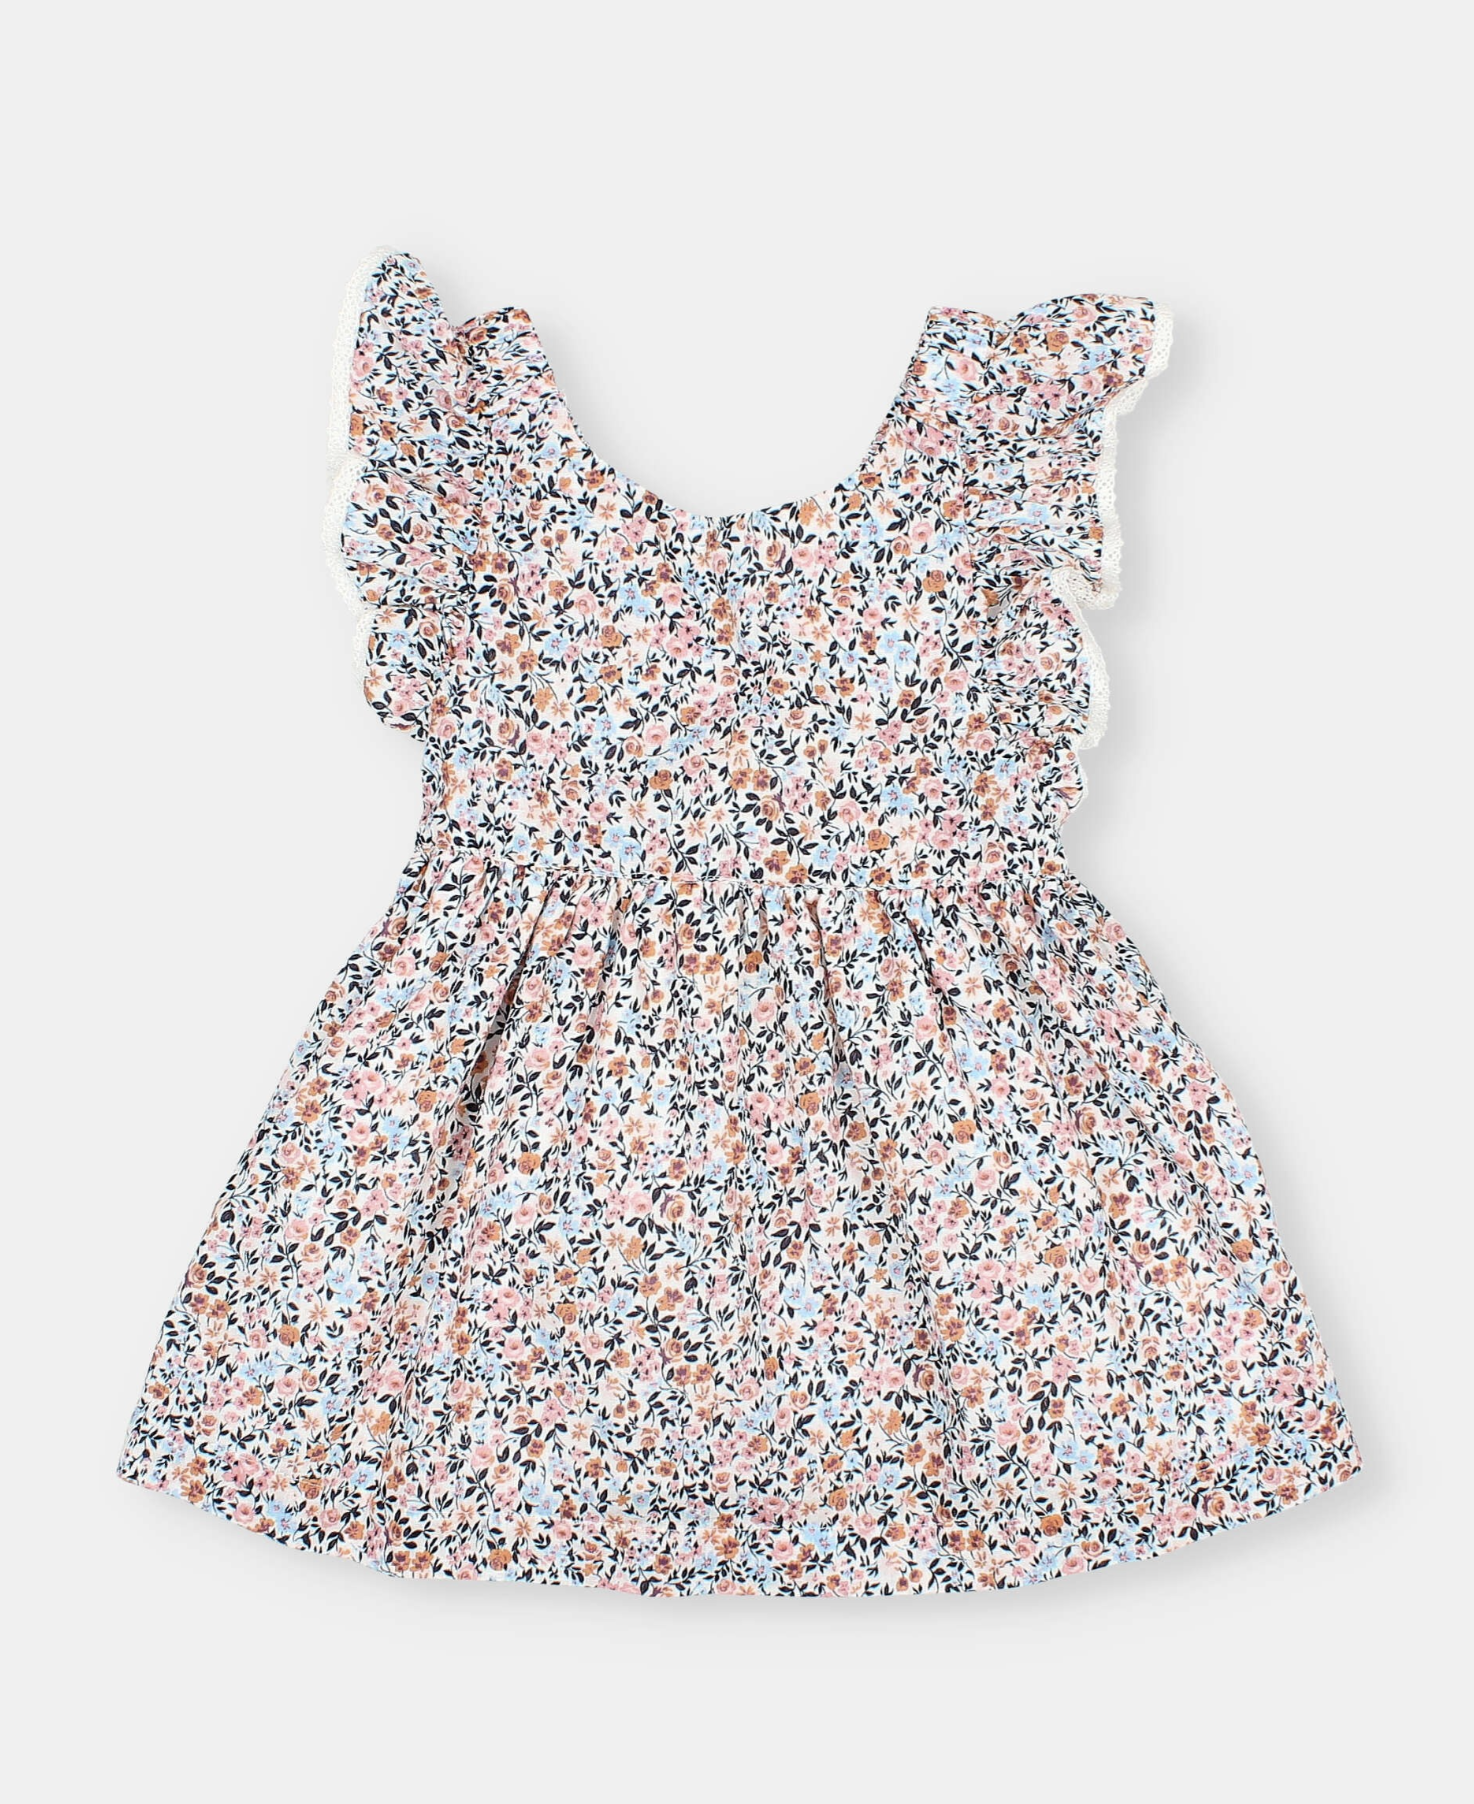 Bloom Dress - Only